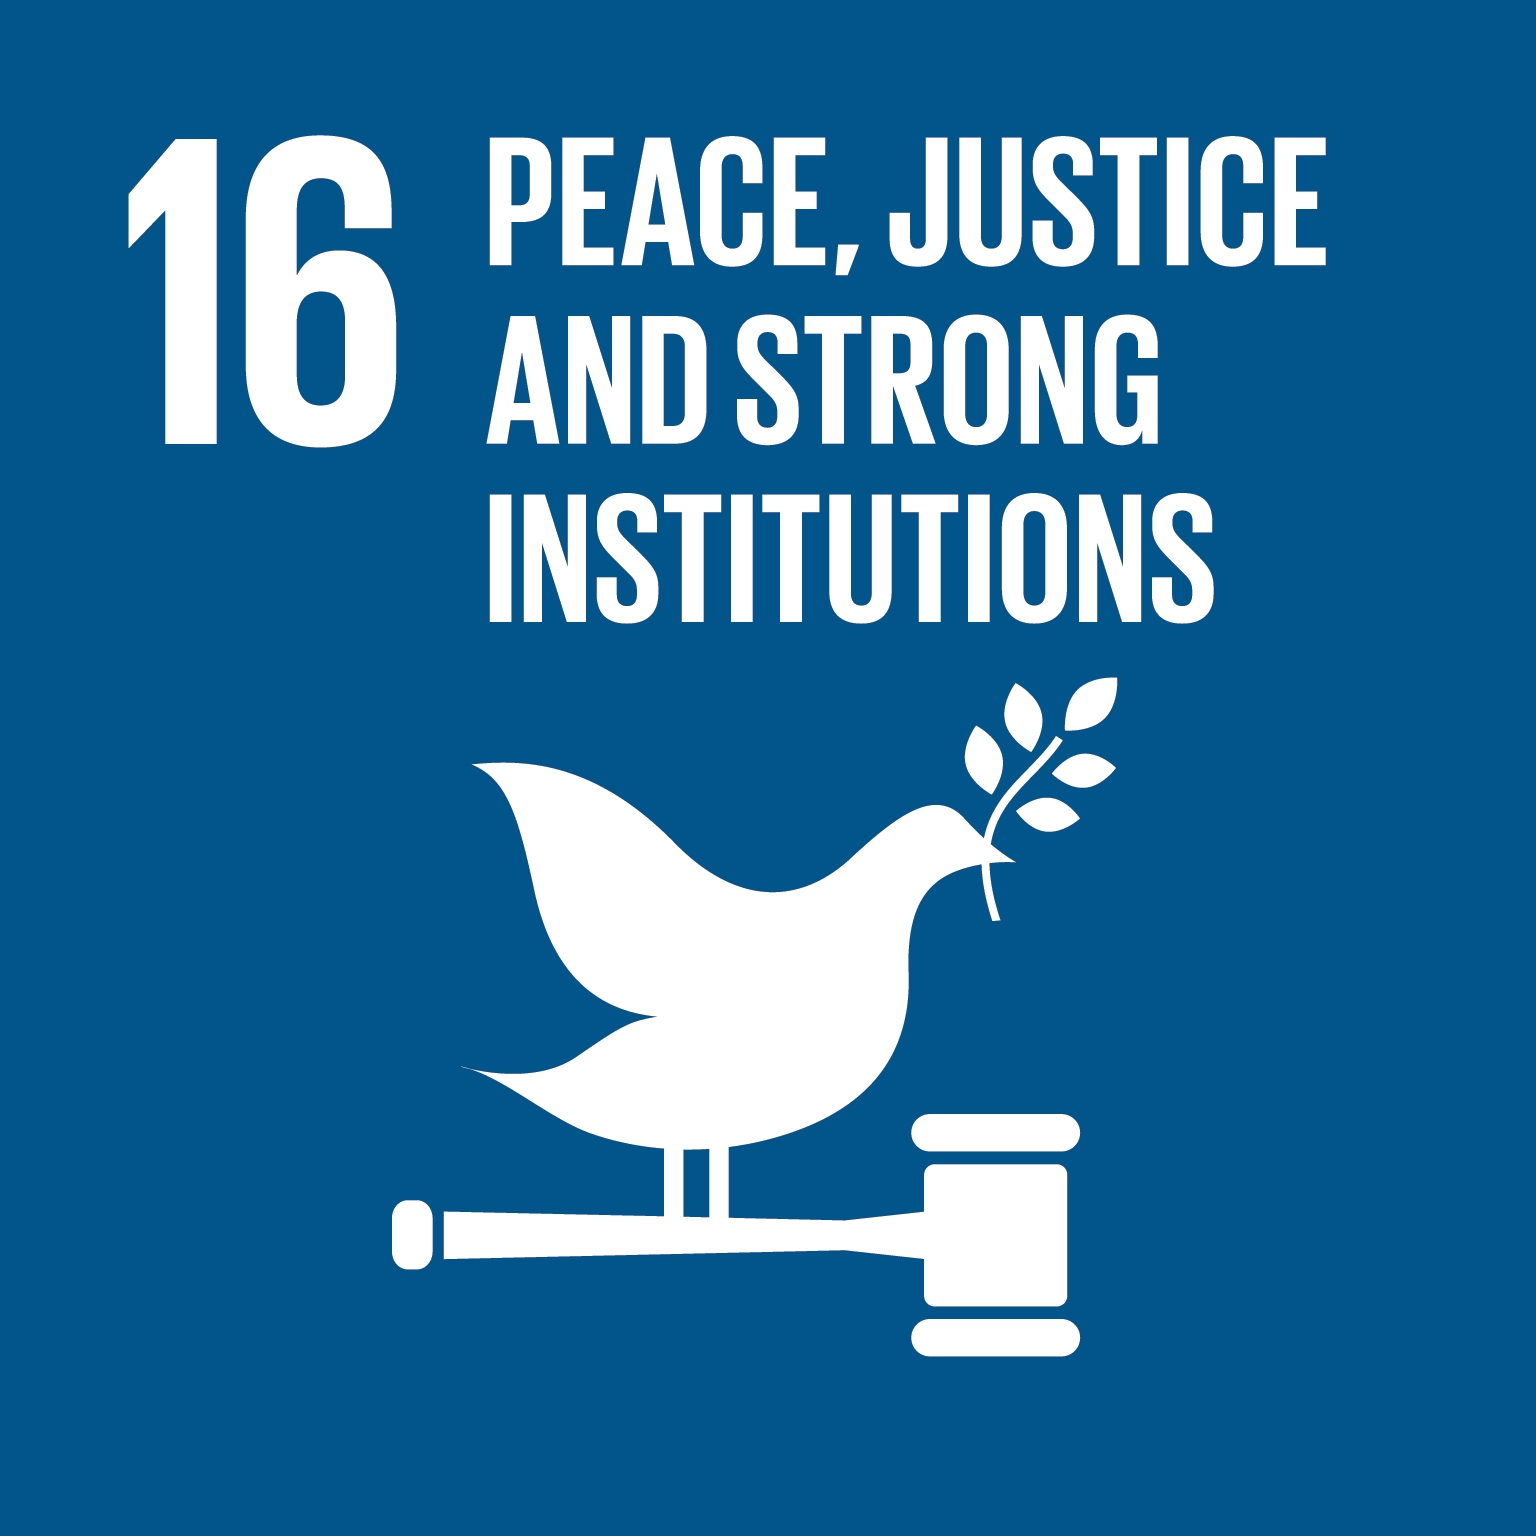 16 PEACE, JUSTICE ASND STRONG INSTITUIONS